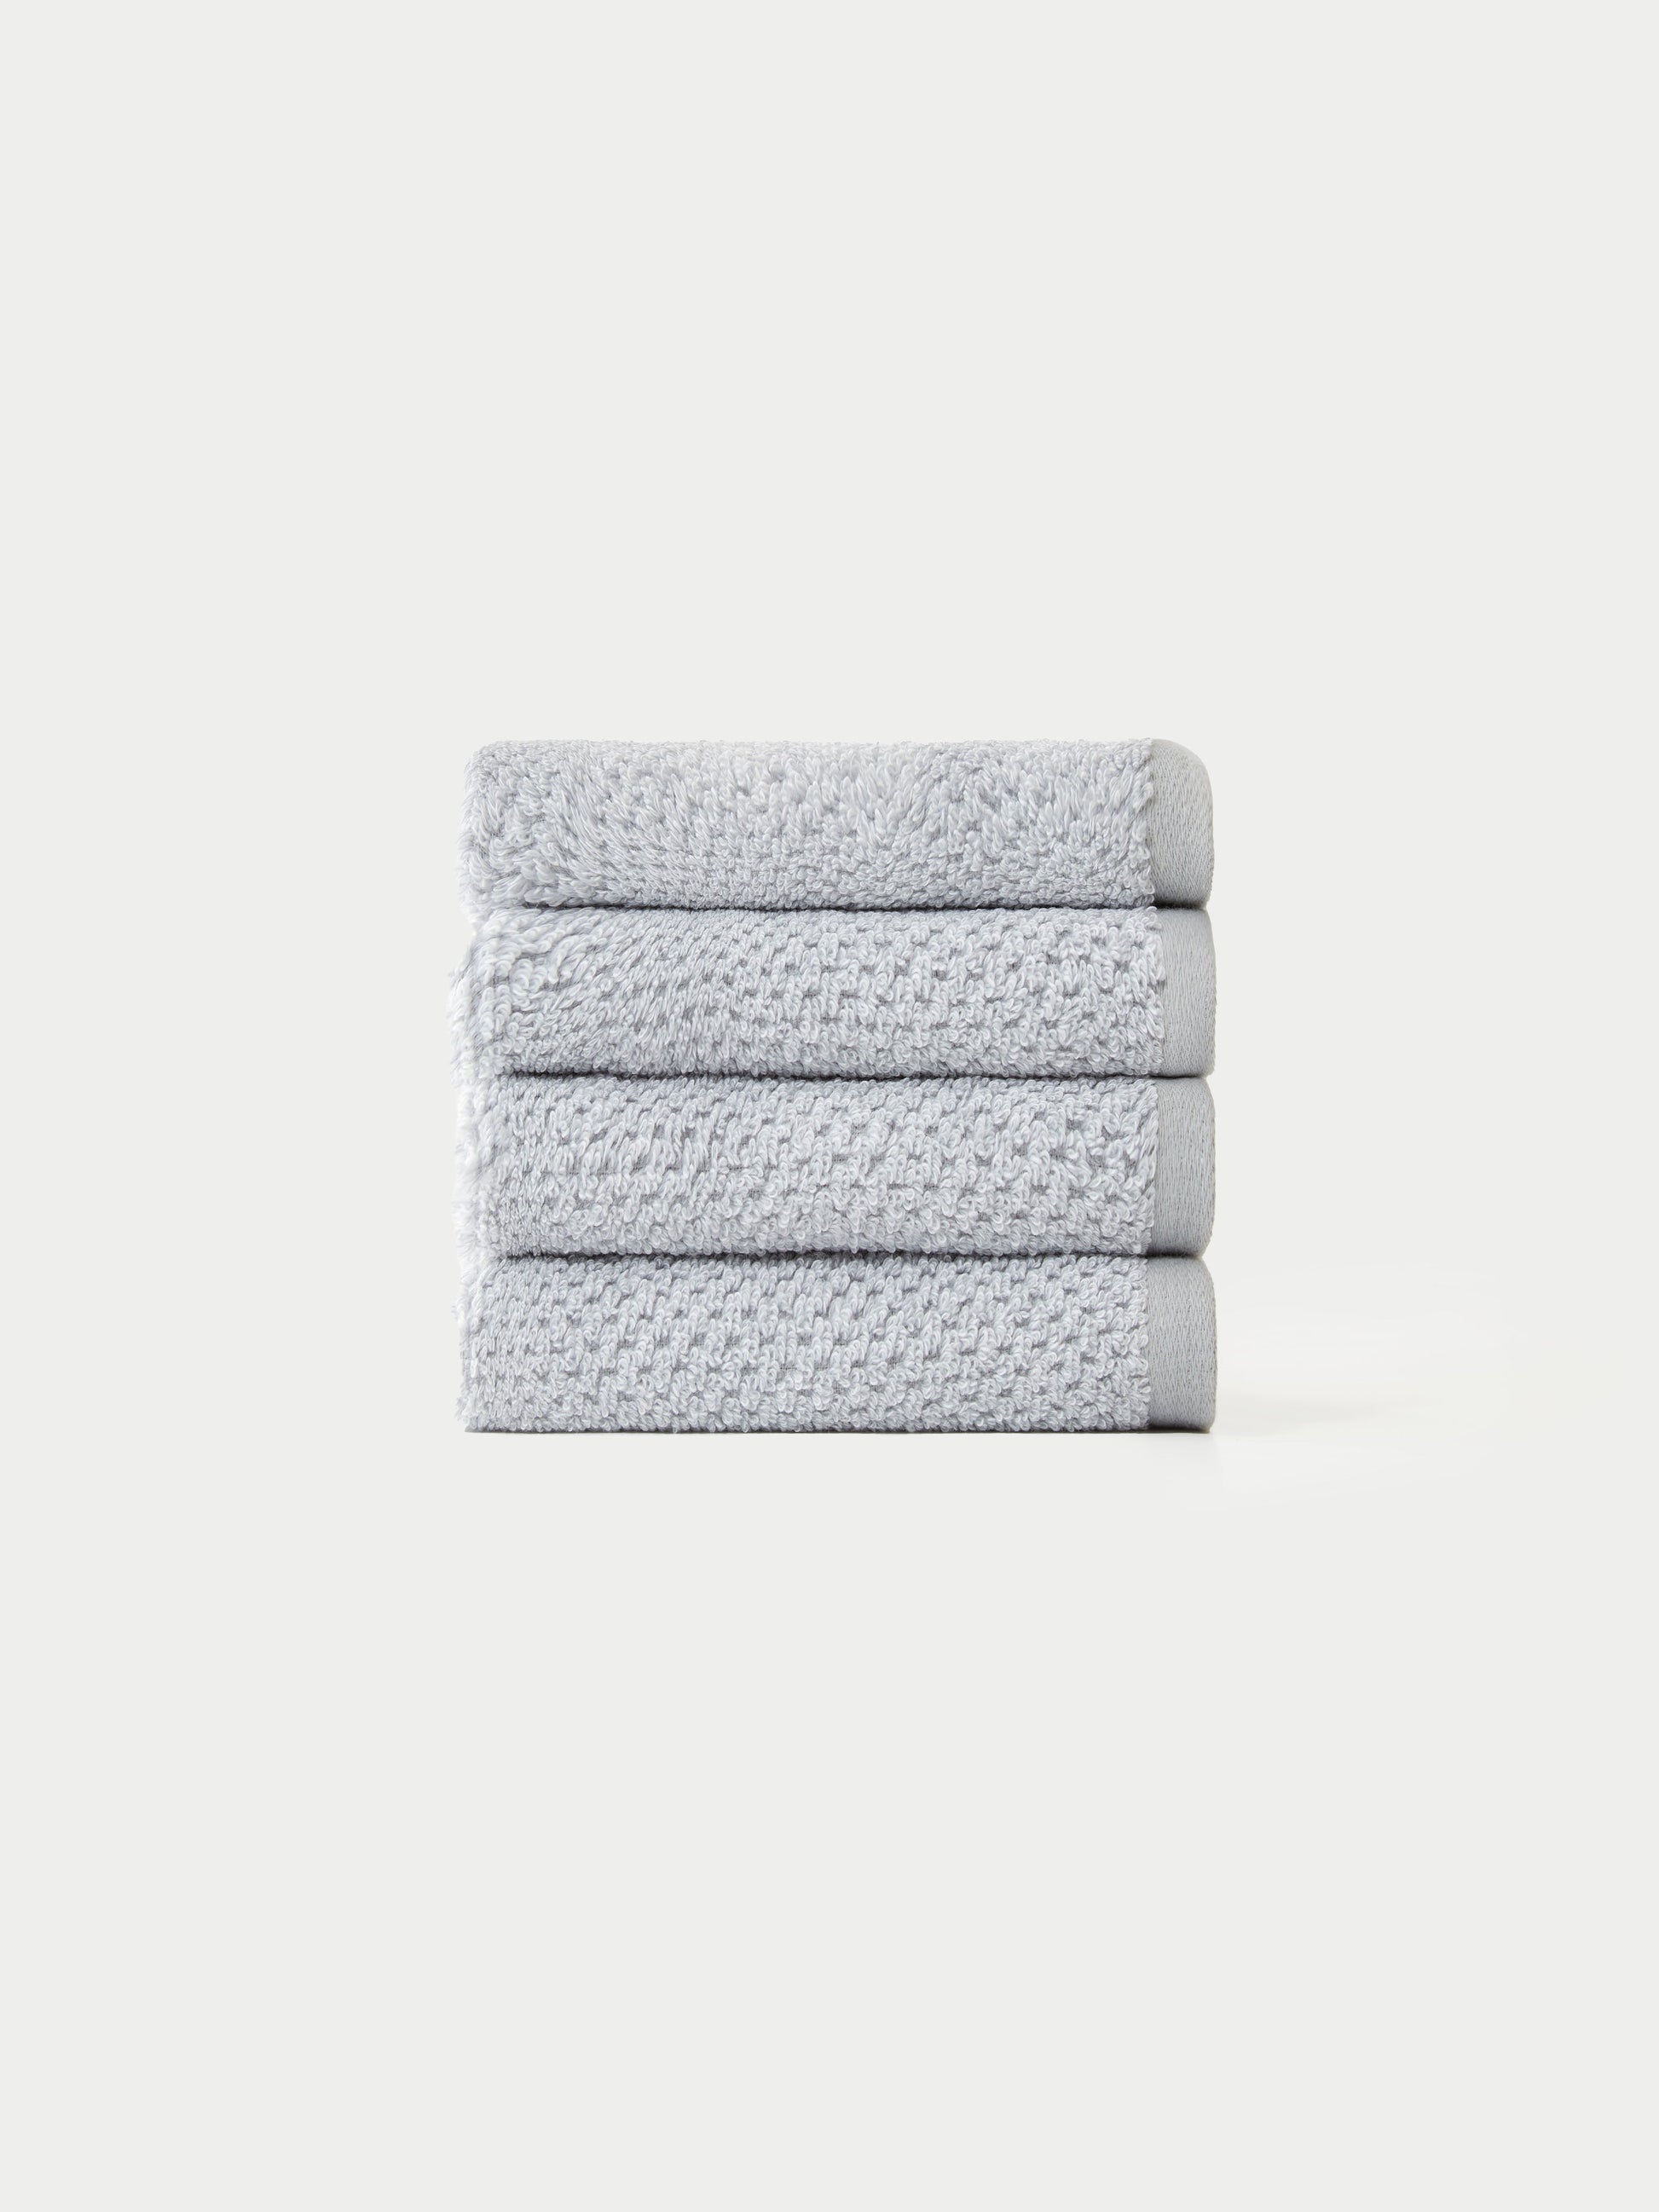 Nantucket Wash Cloths in the color Heathered Harbor Mist. The Wash Cloths are neatly folded. The photo of the wash cloths was taken with a white background.|Color:Heathered Harbor Mist